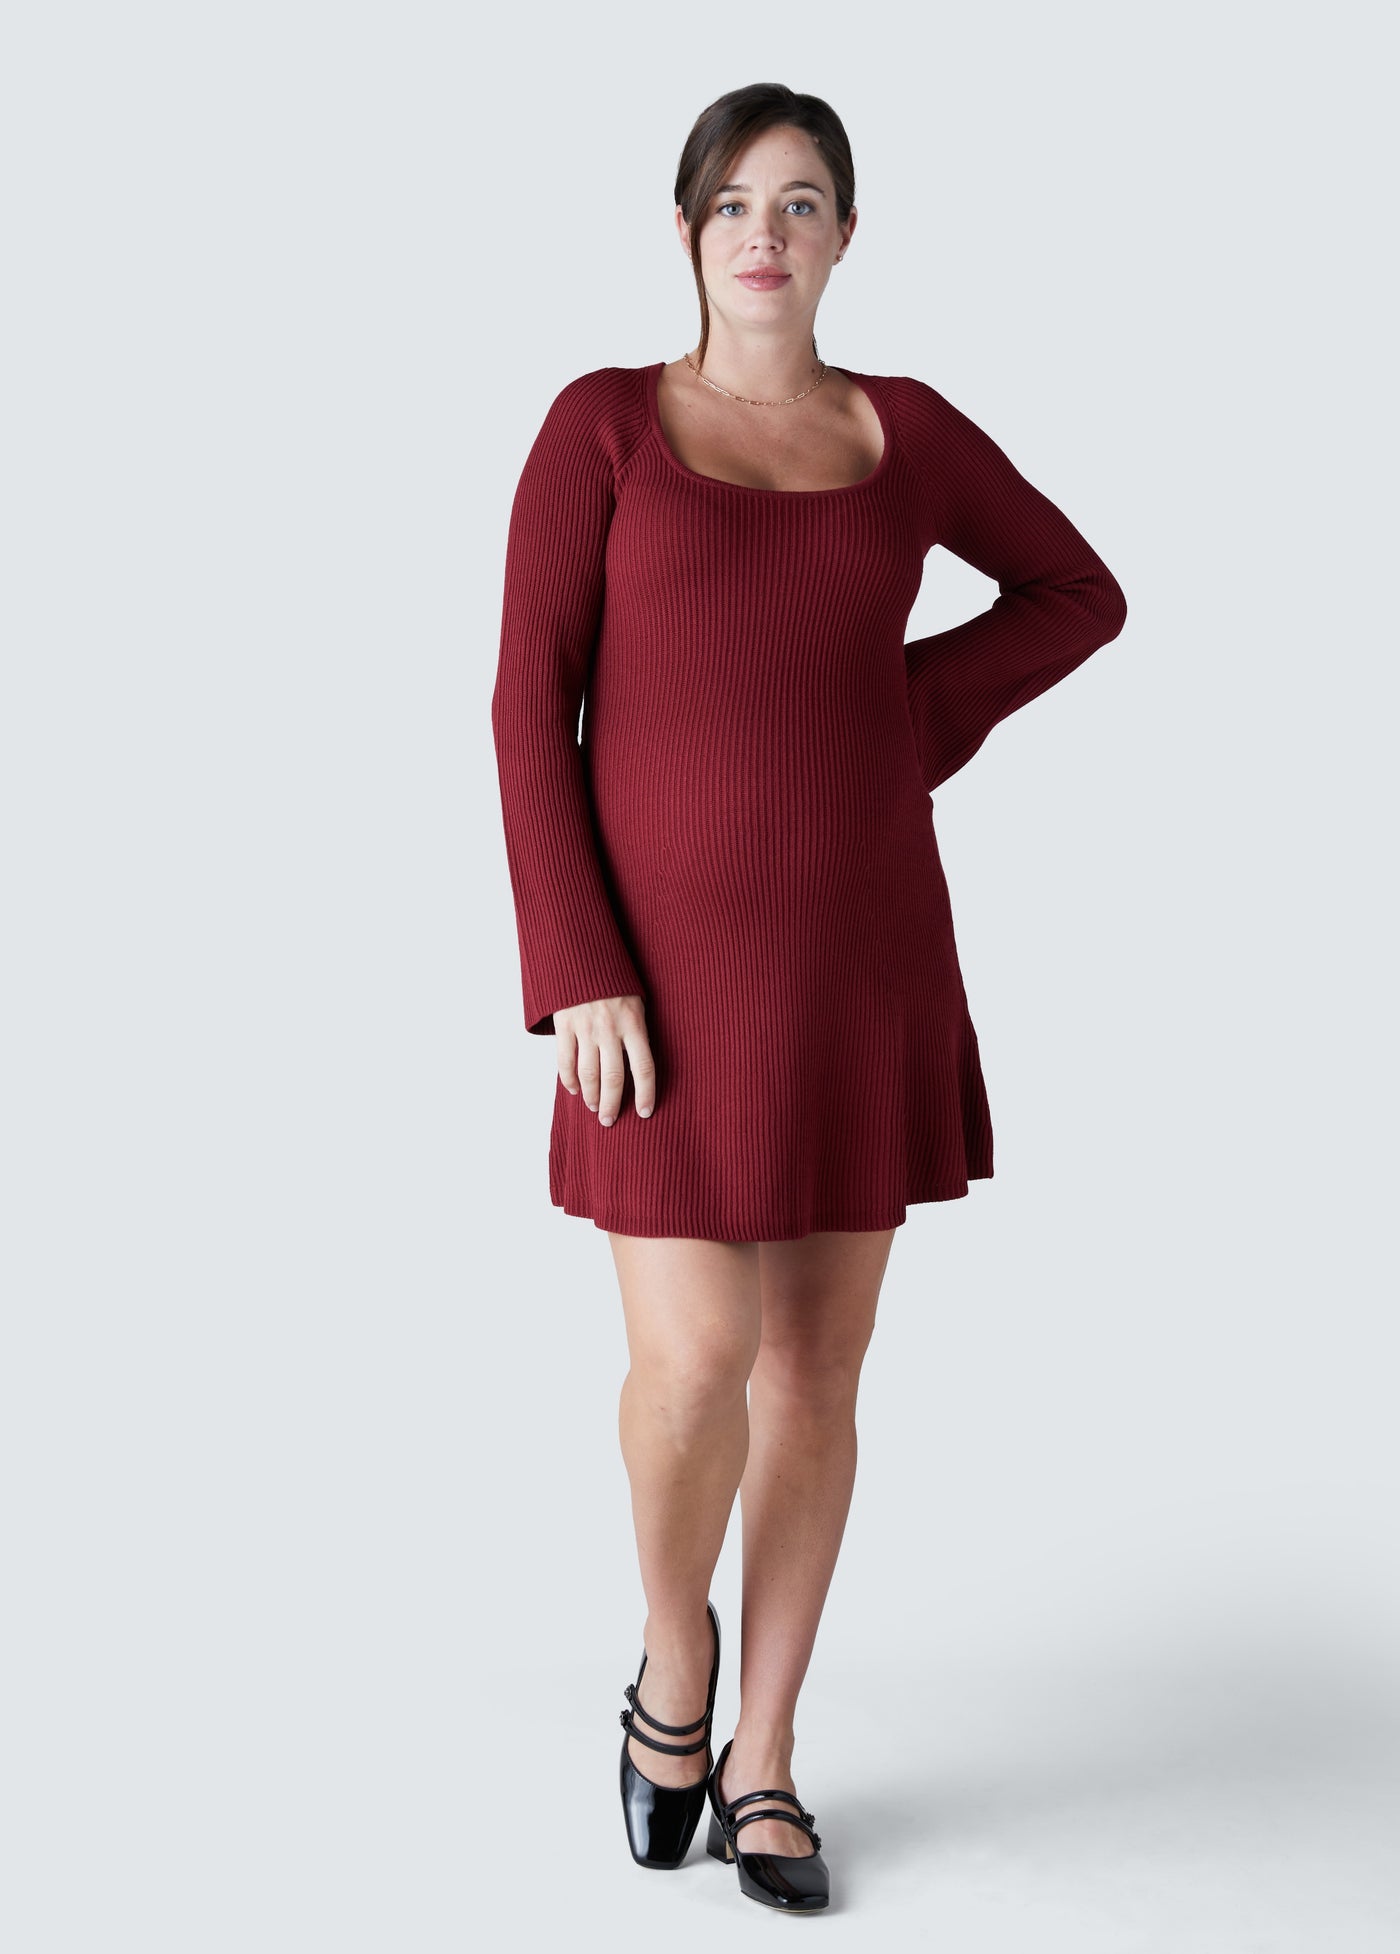 Renee is 5'8", 30 weeks pregnant, and wearing size medium||Cabernet